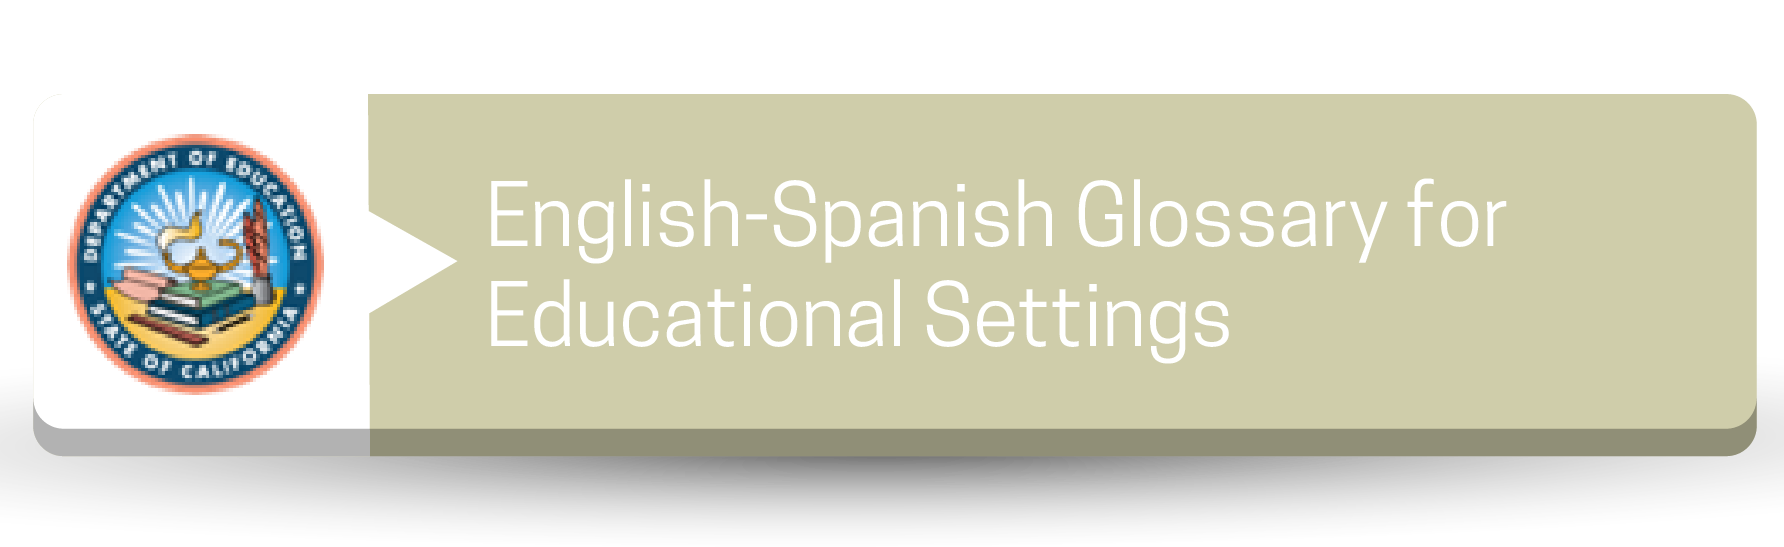 English-Spanish Glossary for Educational Settings - Resources (CDE) Button